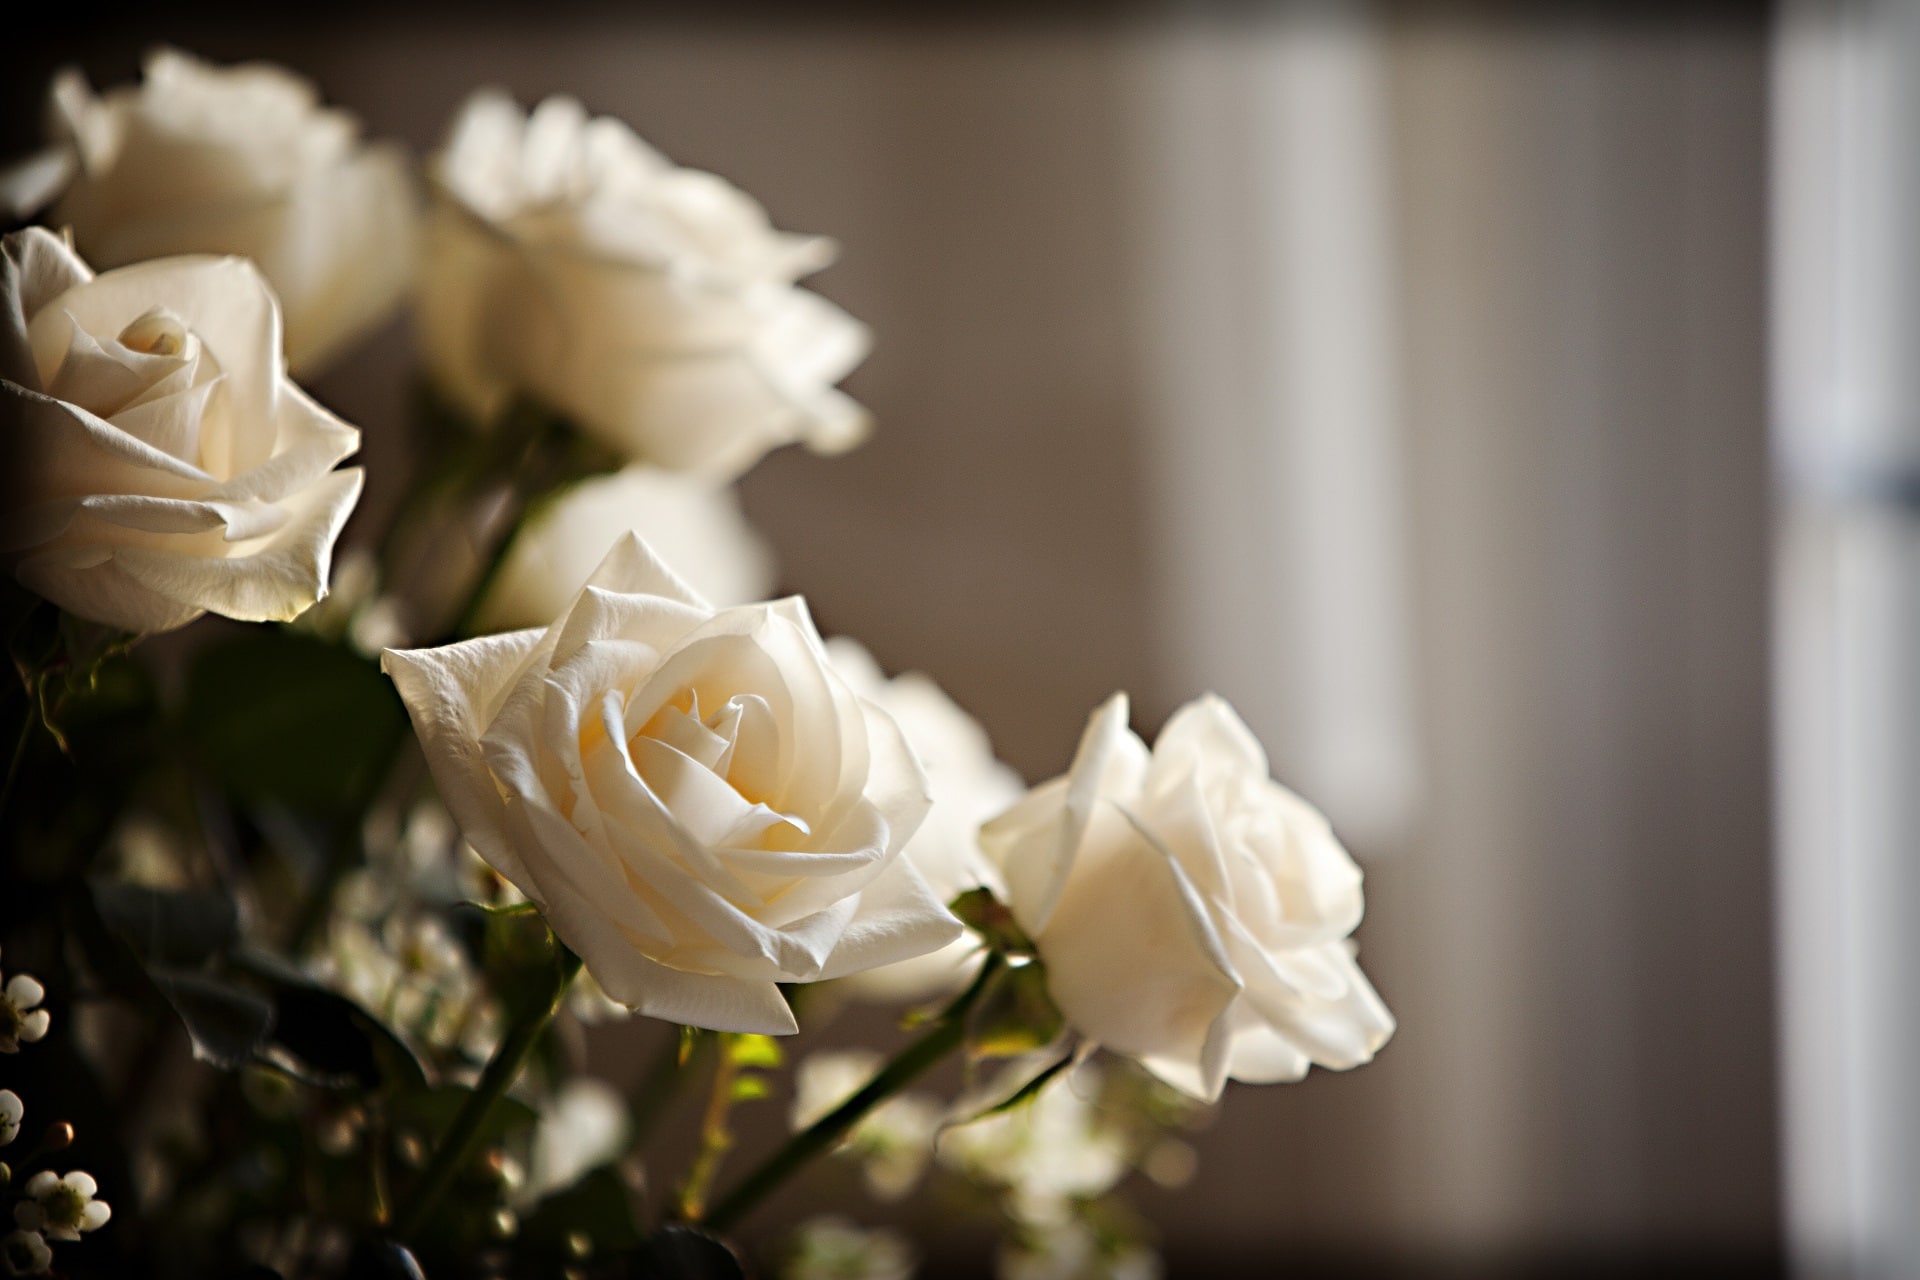 Cut white roses gathered in a flower vase on lit by window light in a home. Flowers can be used for celebrations, parties or even funerals and memorials. Cream colored roses are featured in a song from the Sound of Music.